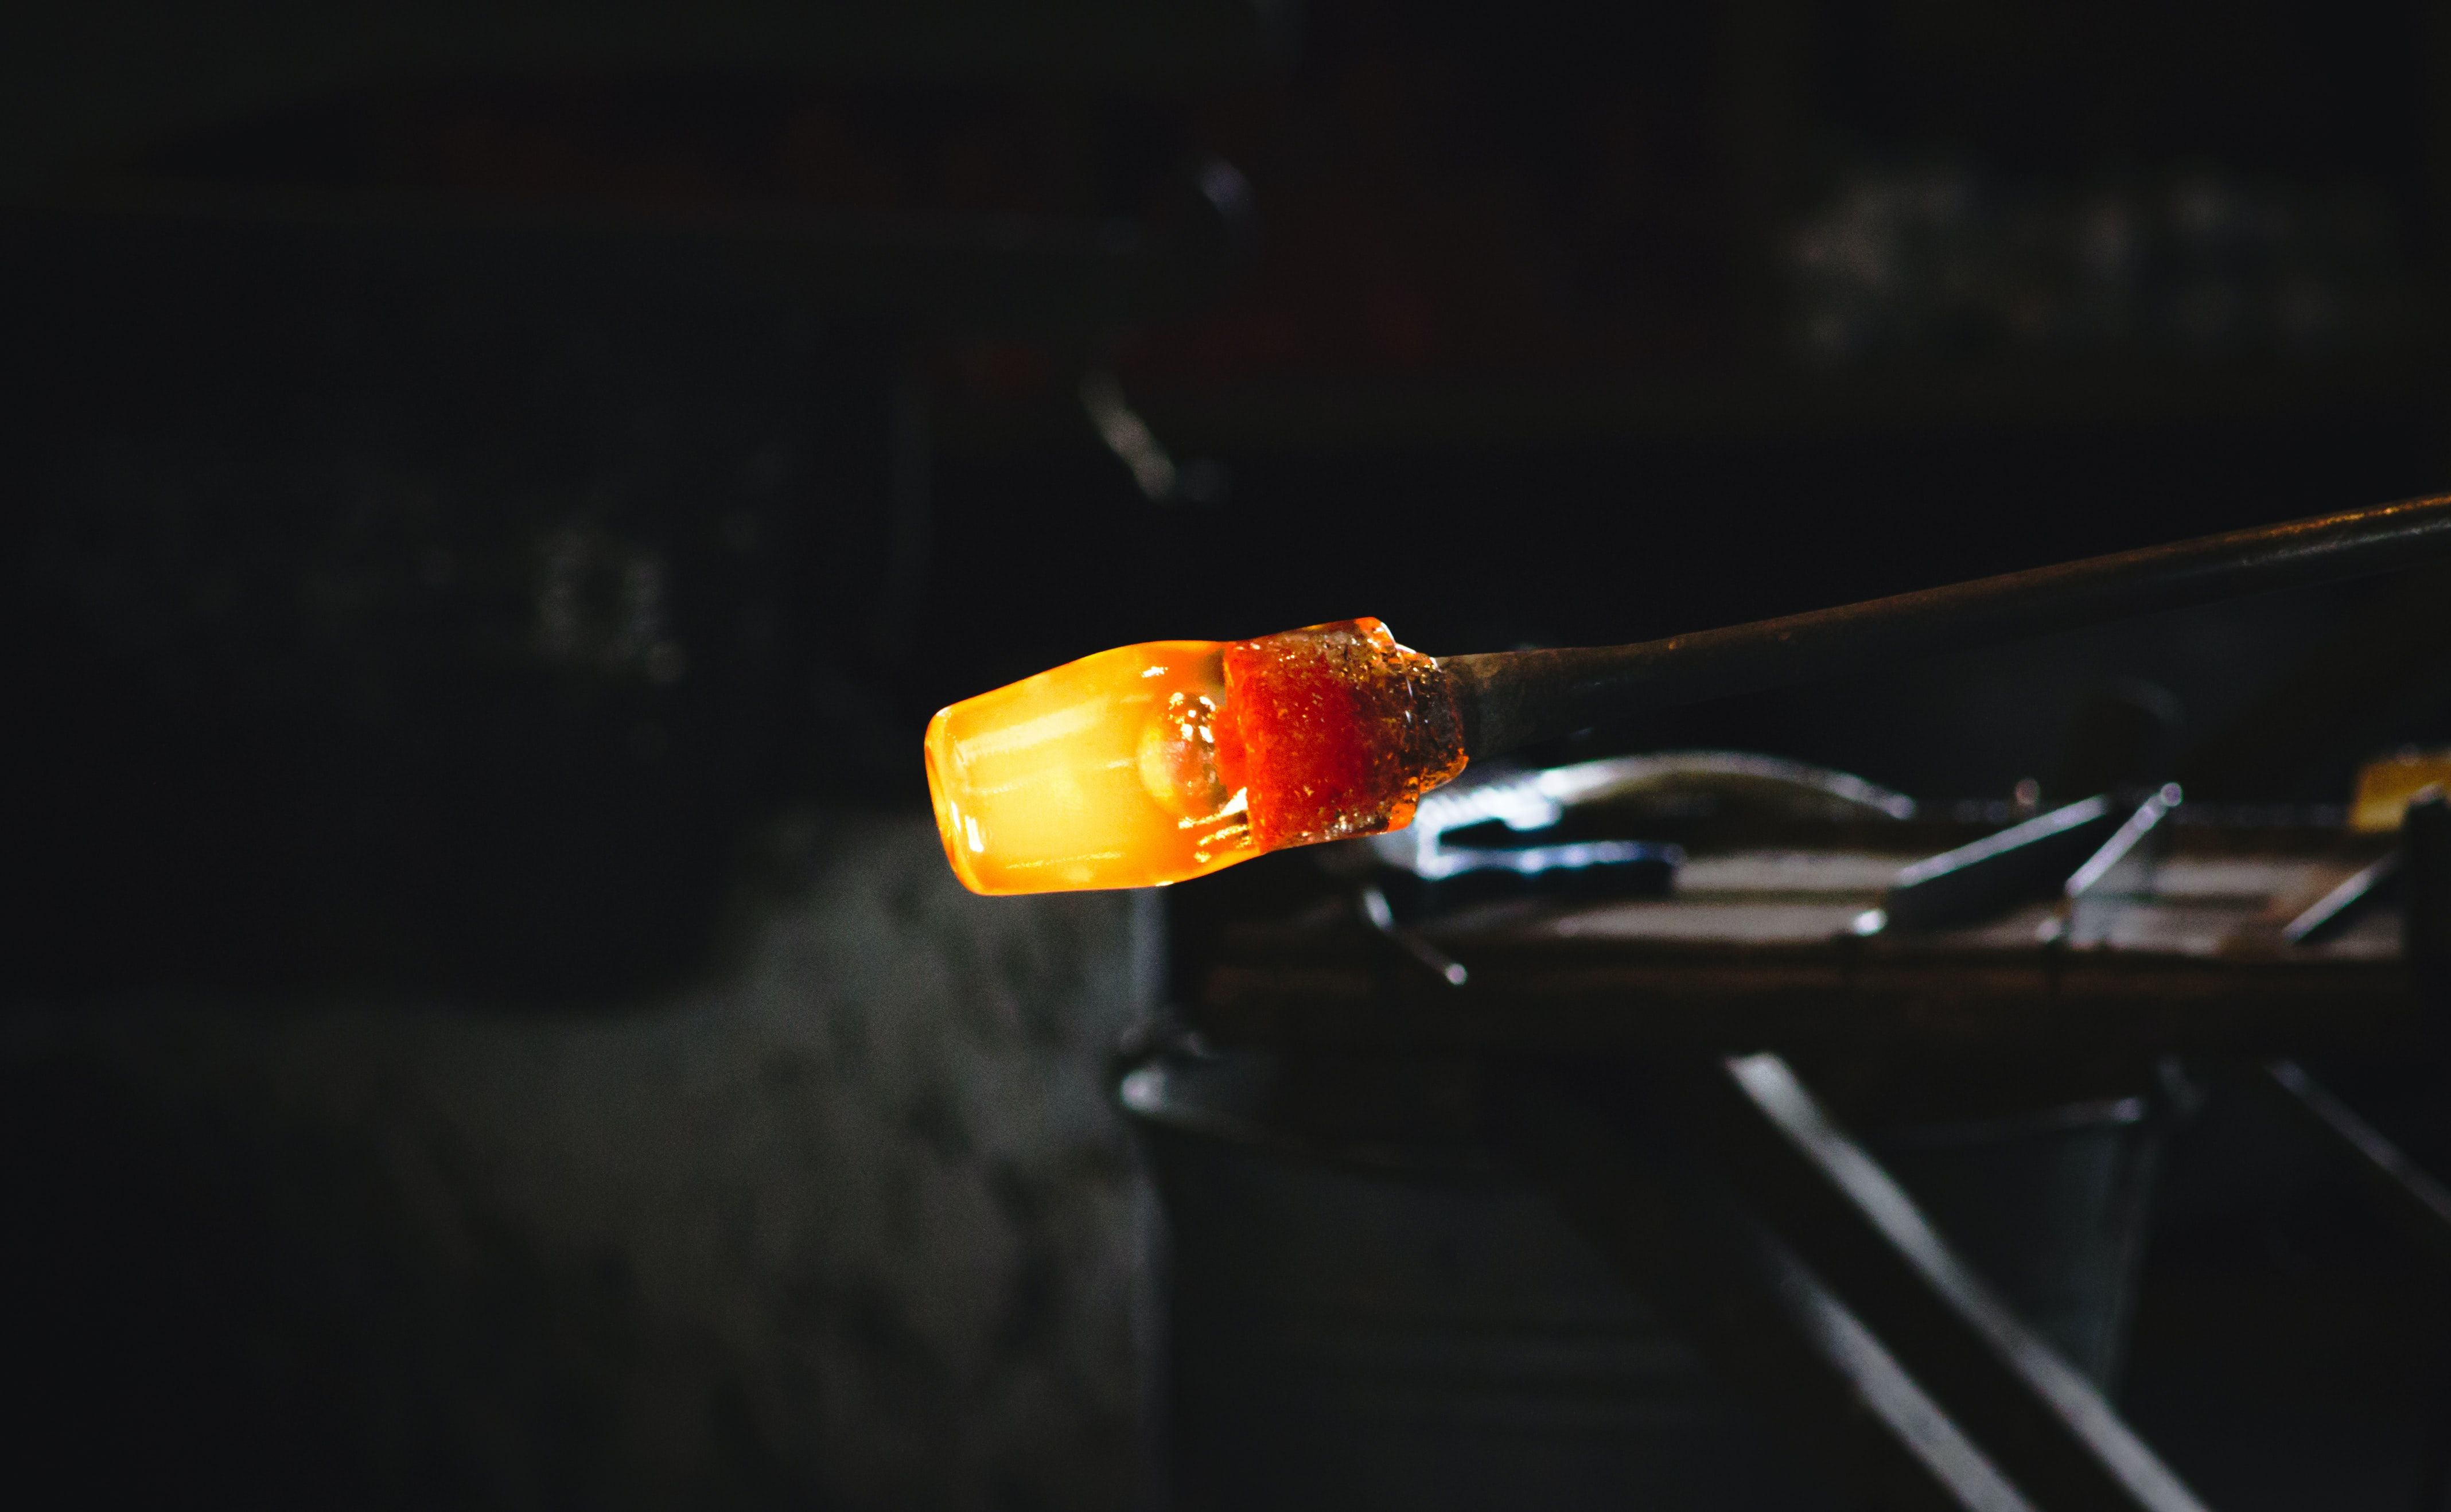 This is molten glass being blown to form an item in Sweden